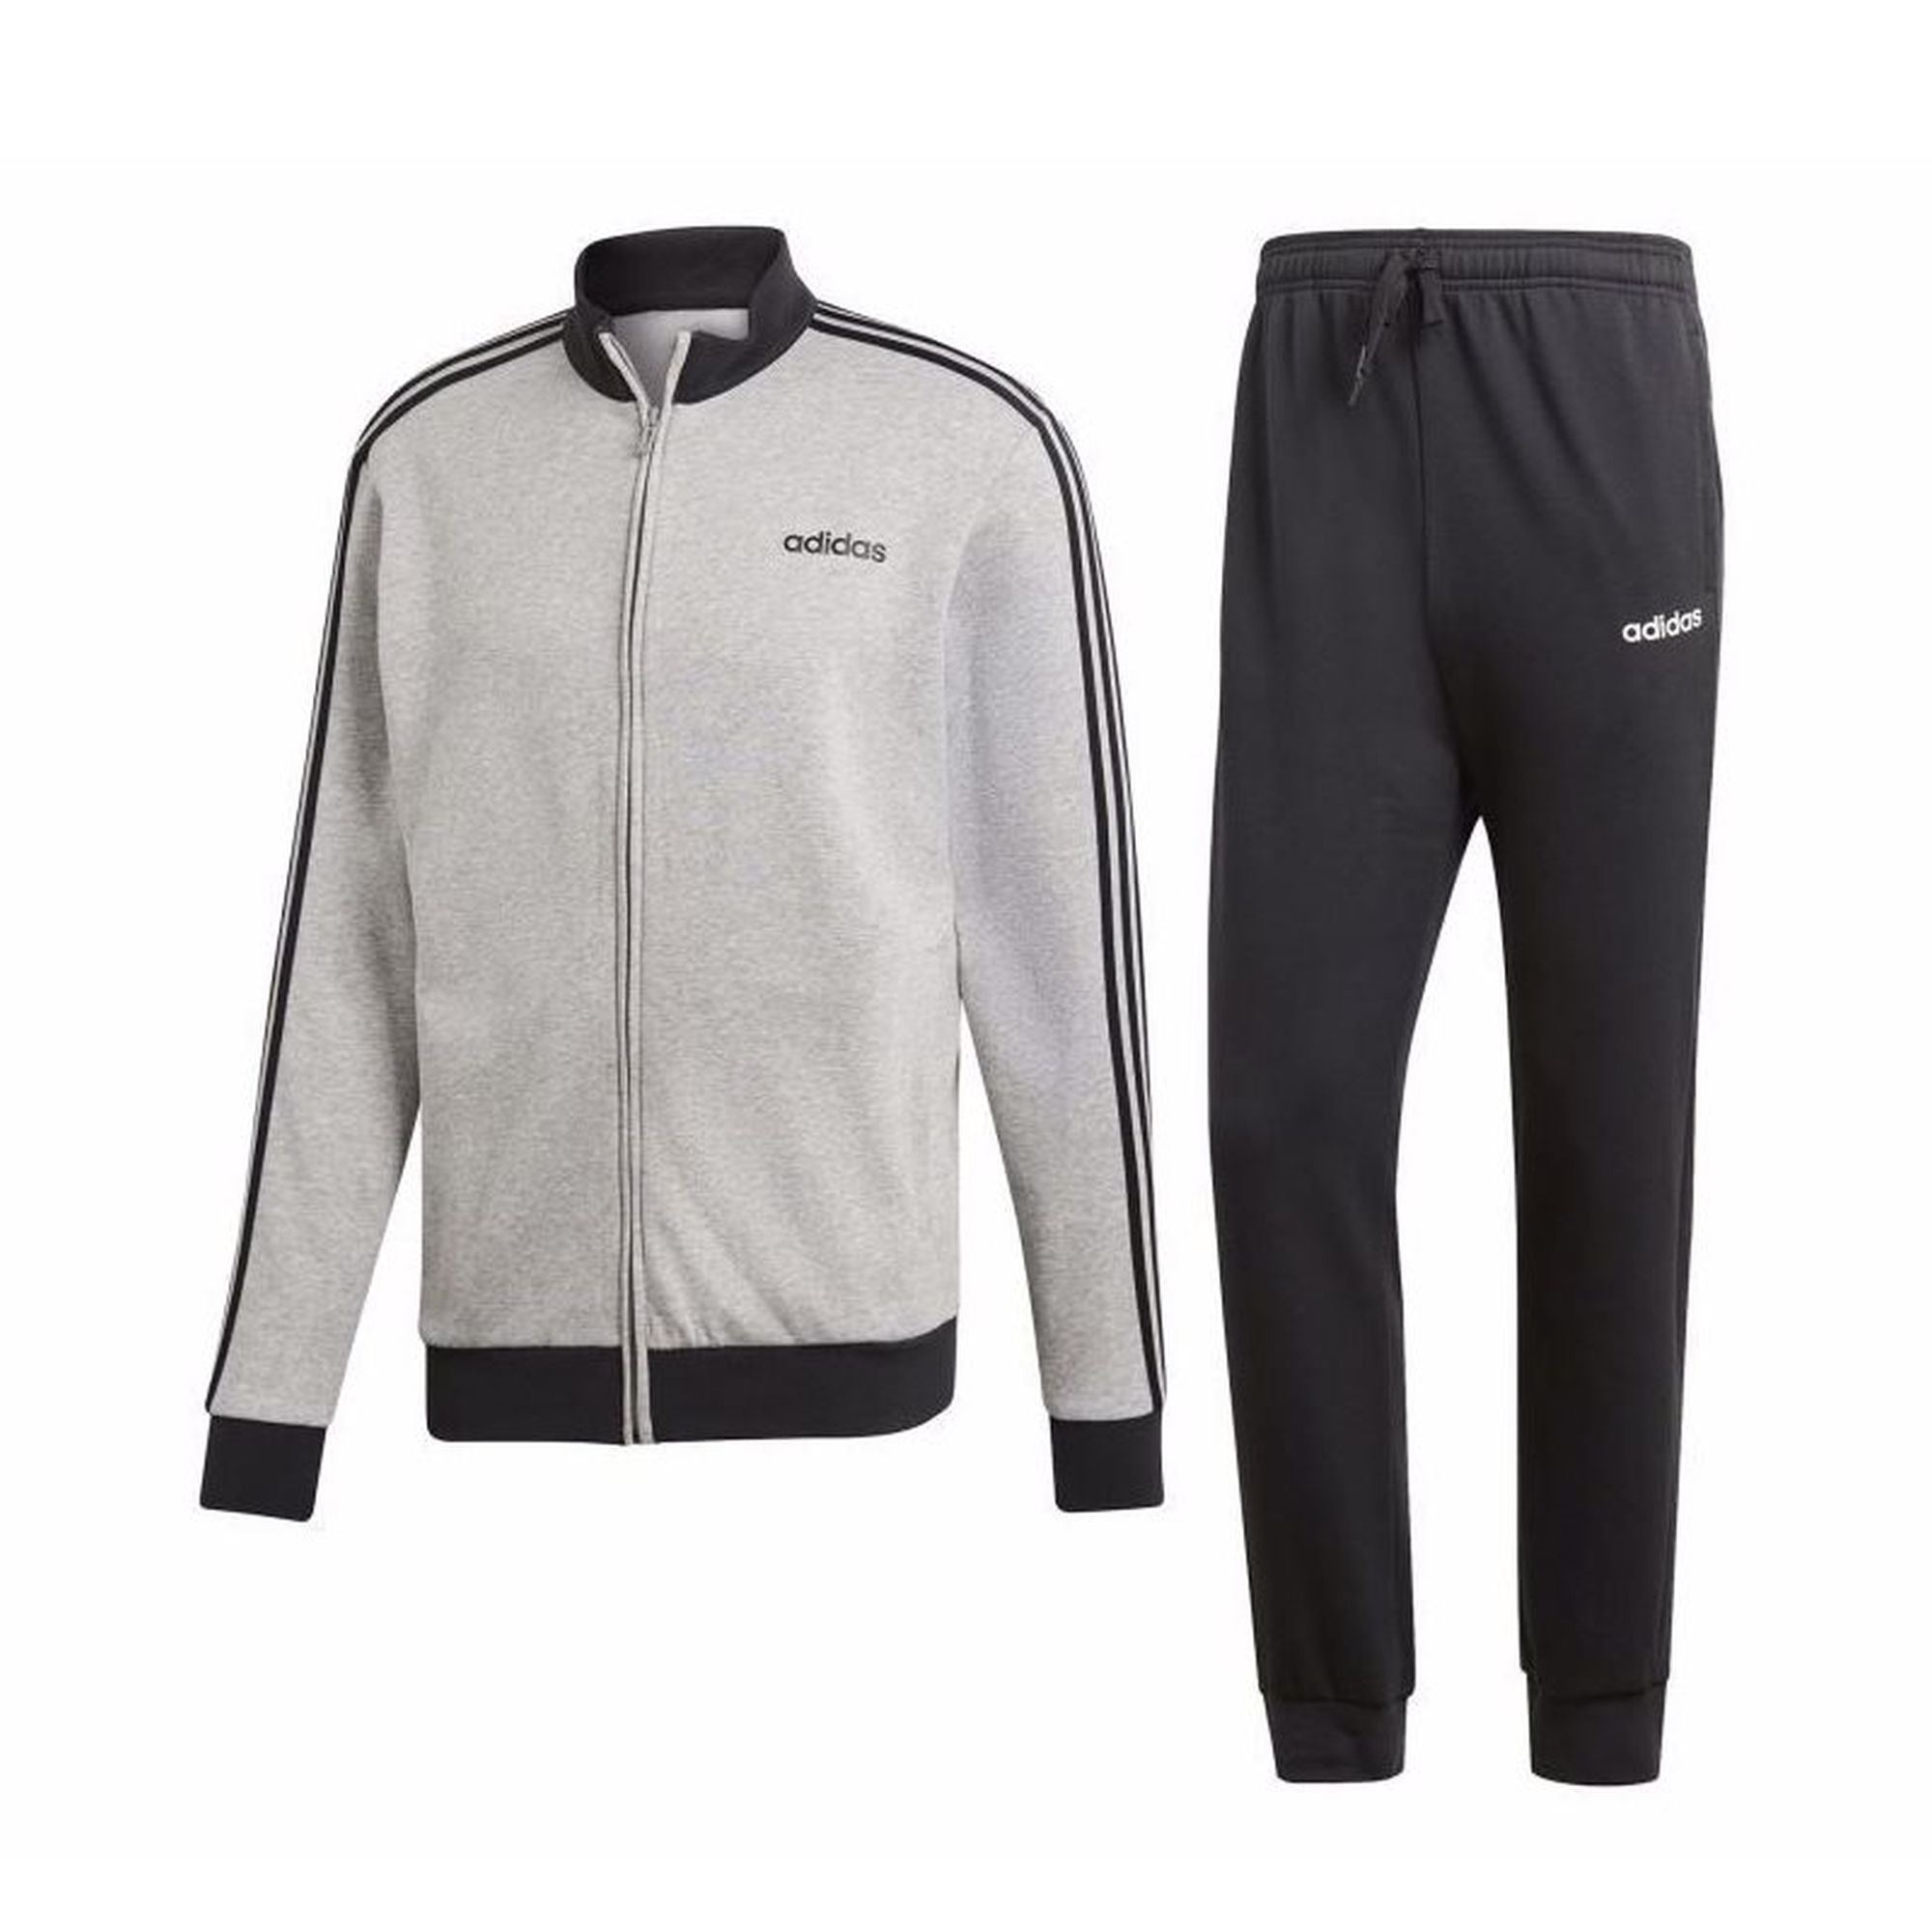 adidas Performance - Tracksuit Set , Mts Co Relax - Brands